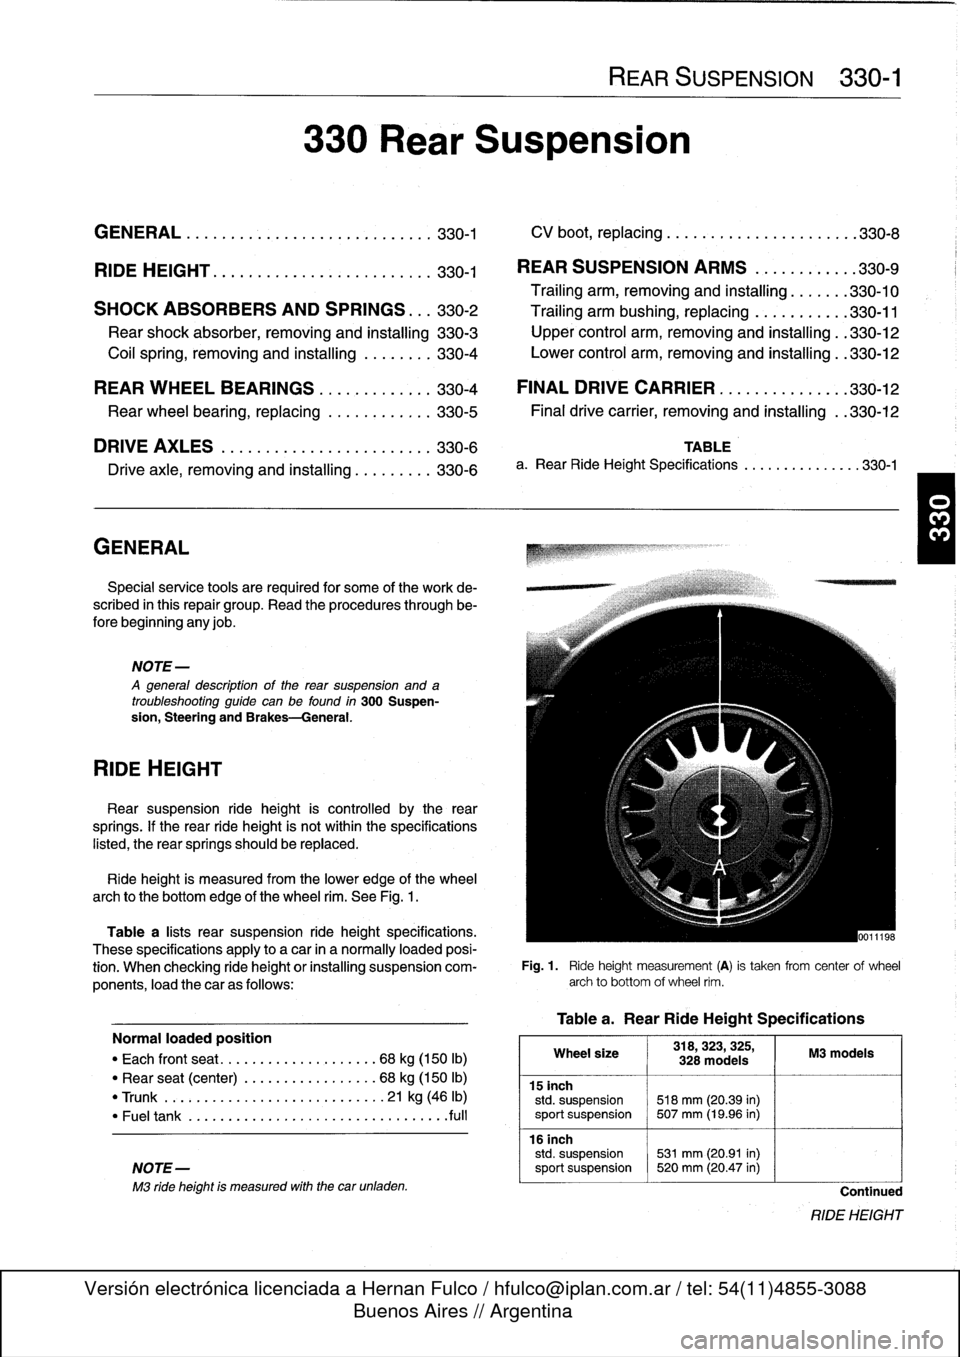 BMW 323i 1993 E36 Workshop Manual 
GENERAL
.......
.
.
.
.
.
.
.
.
.
.......
.
...
.330-1

	

CV
boot,
replacing
........
.
.
.
.........
.
.330-8

RIDE
HEIGHT
....
.
.
.
.
.
...
.
...
.
.
.
.
.
...
.
330-1

	

REAR
SUSPENSION
ARMS
.
